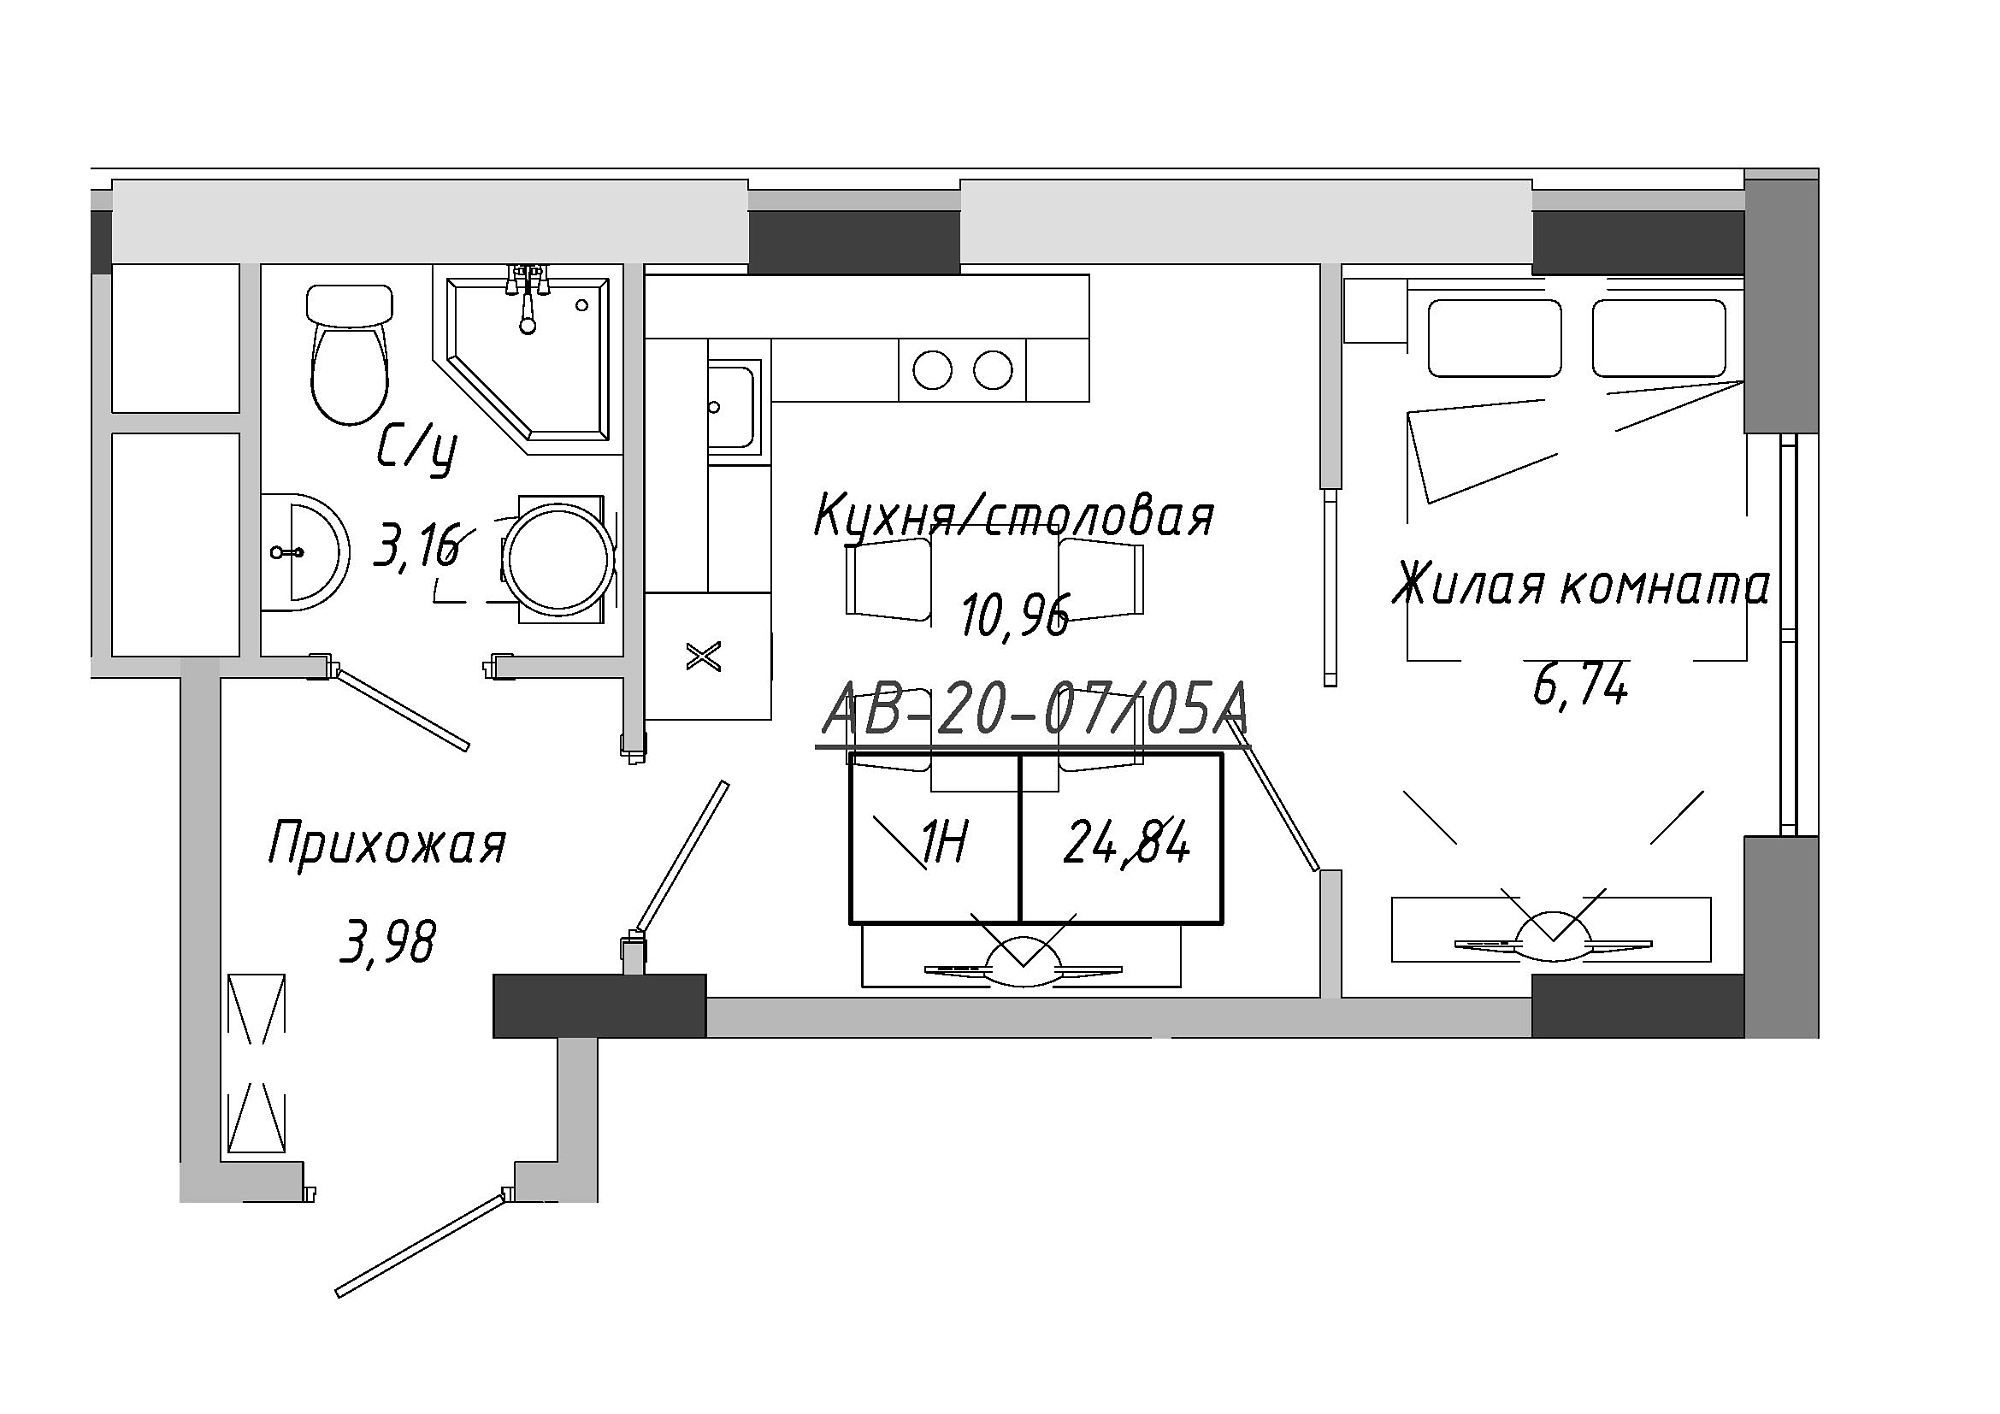 Planning 1-rm flats area 24.41m2, AB-20-07/0005а.